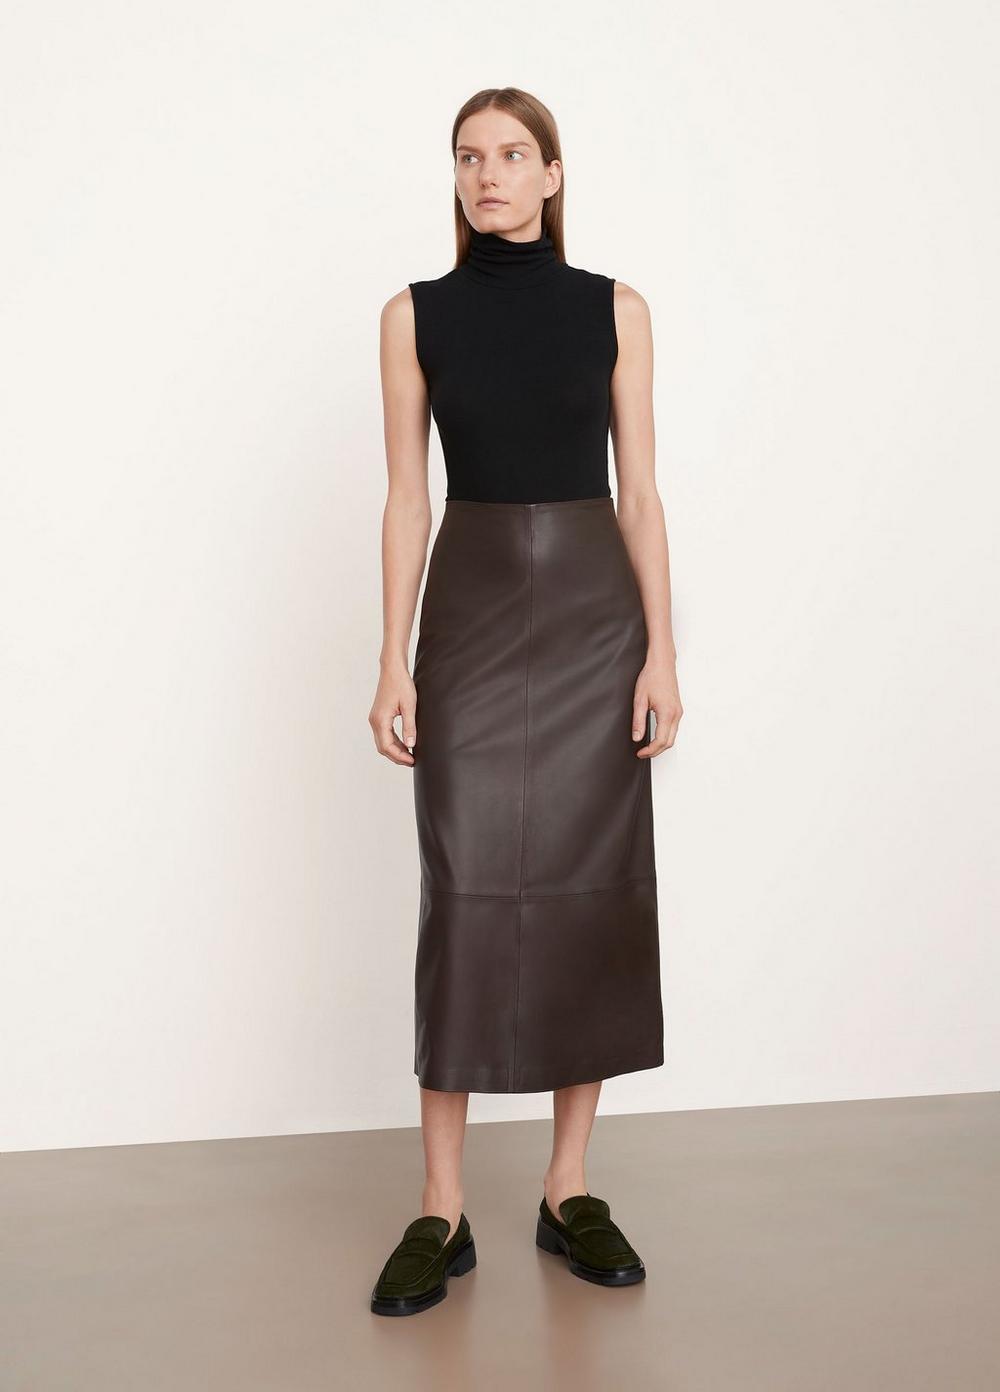 Vince | Leather Straight Skirt in Hickory | Vince Unfold